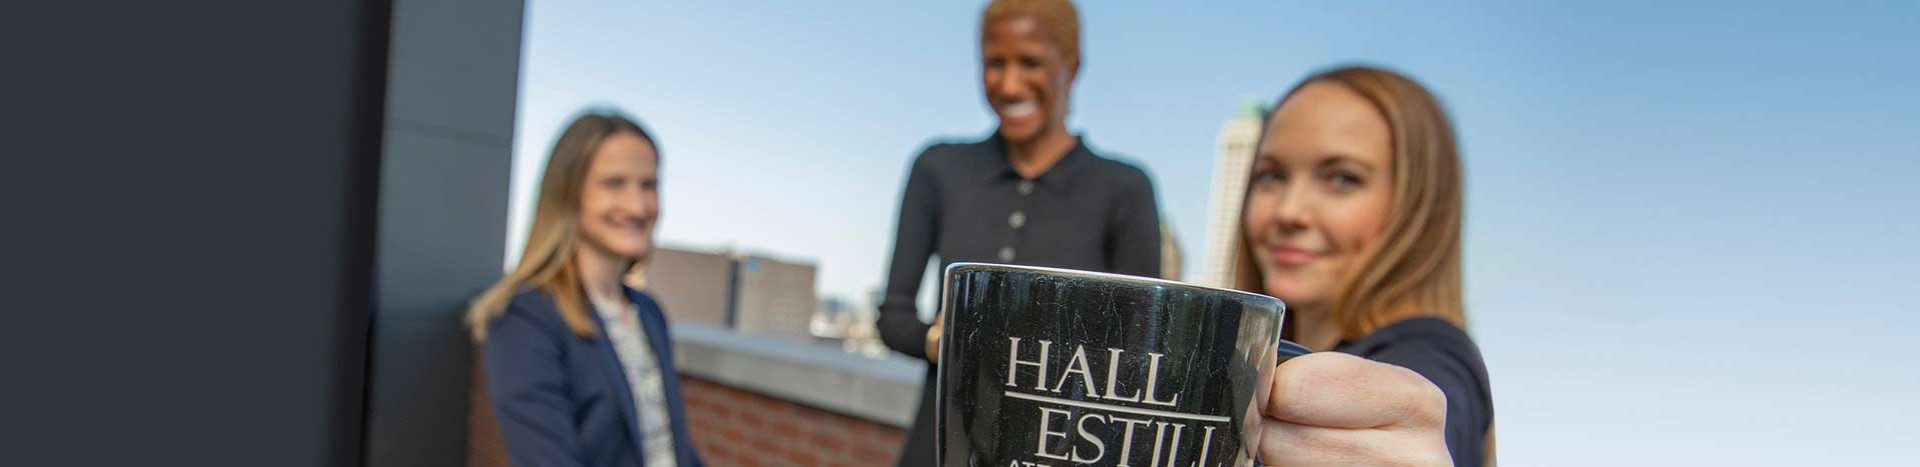 Attorneys Smiling While Holding Hall Estill Attorneys at Law Coffee Mug